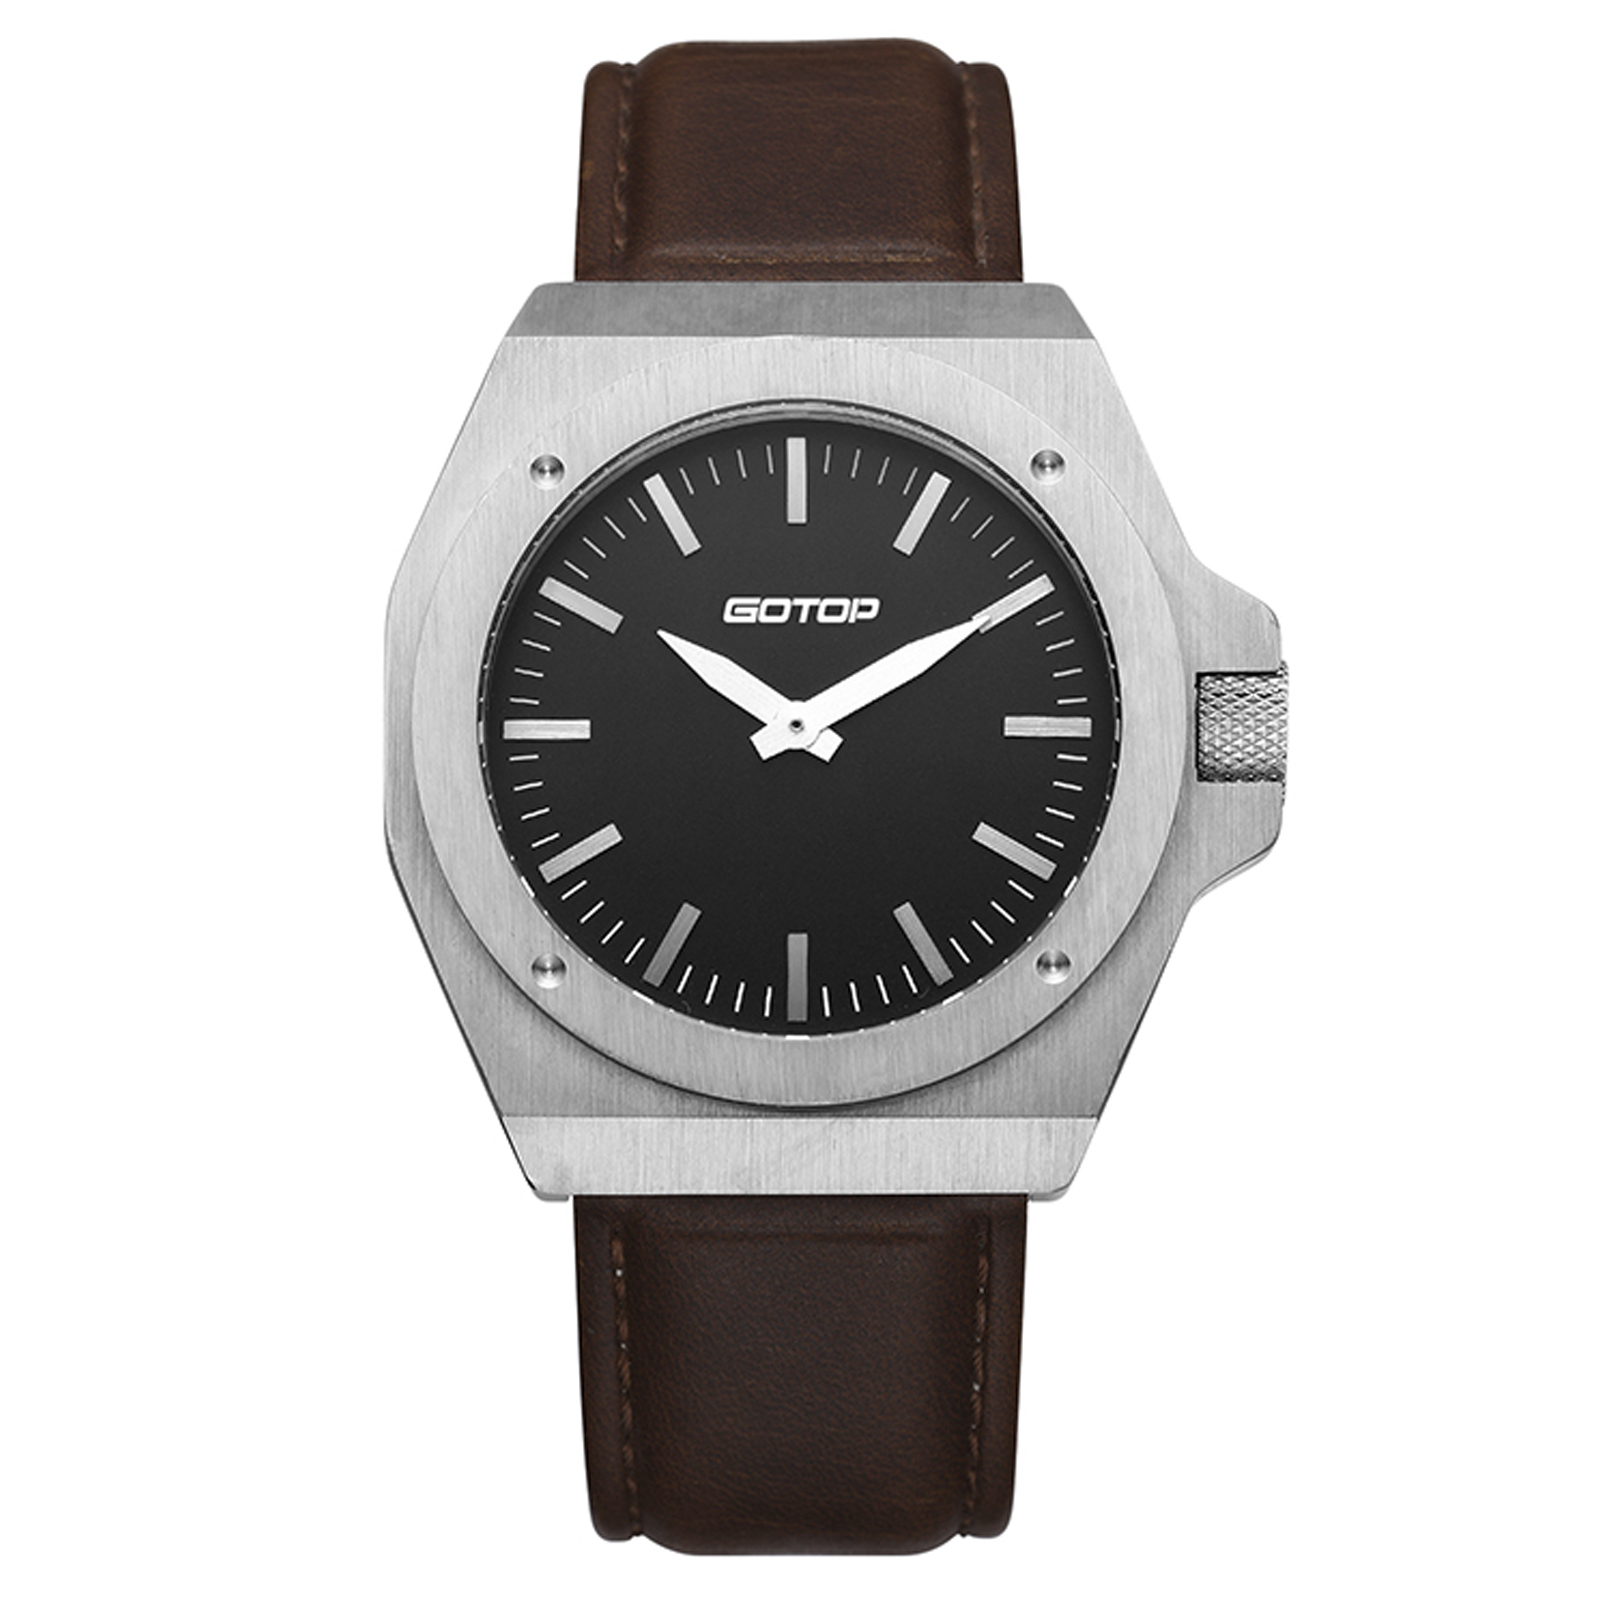 Stainless-Steel Men's Watch With Brown Leather Strap